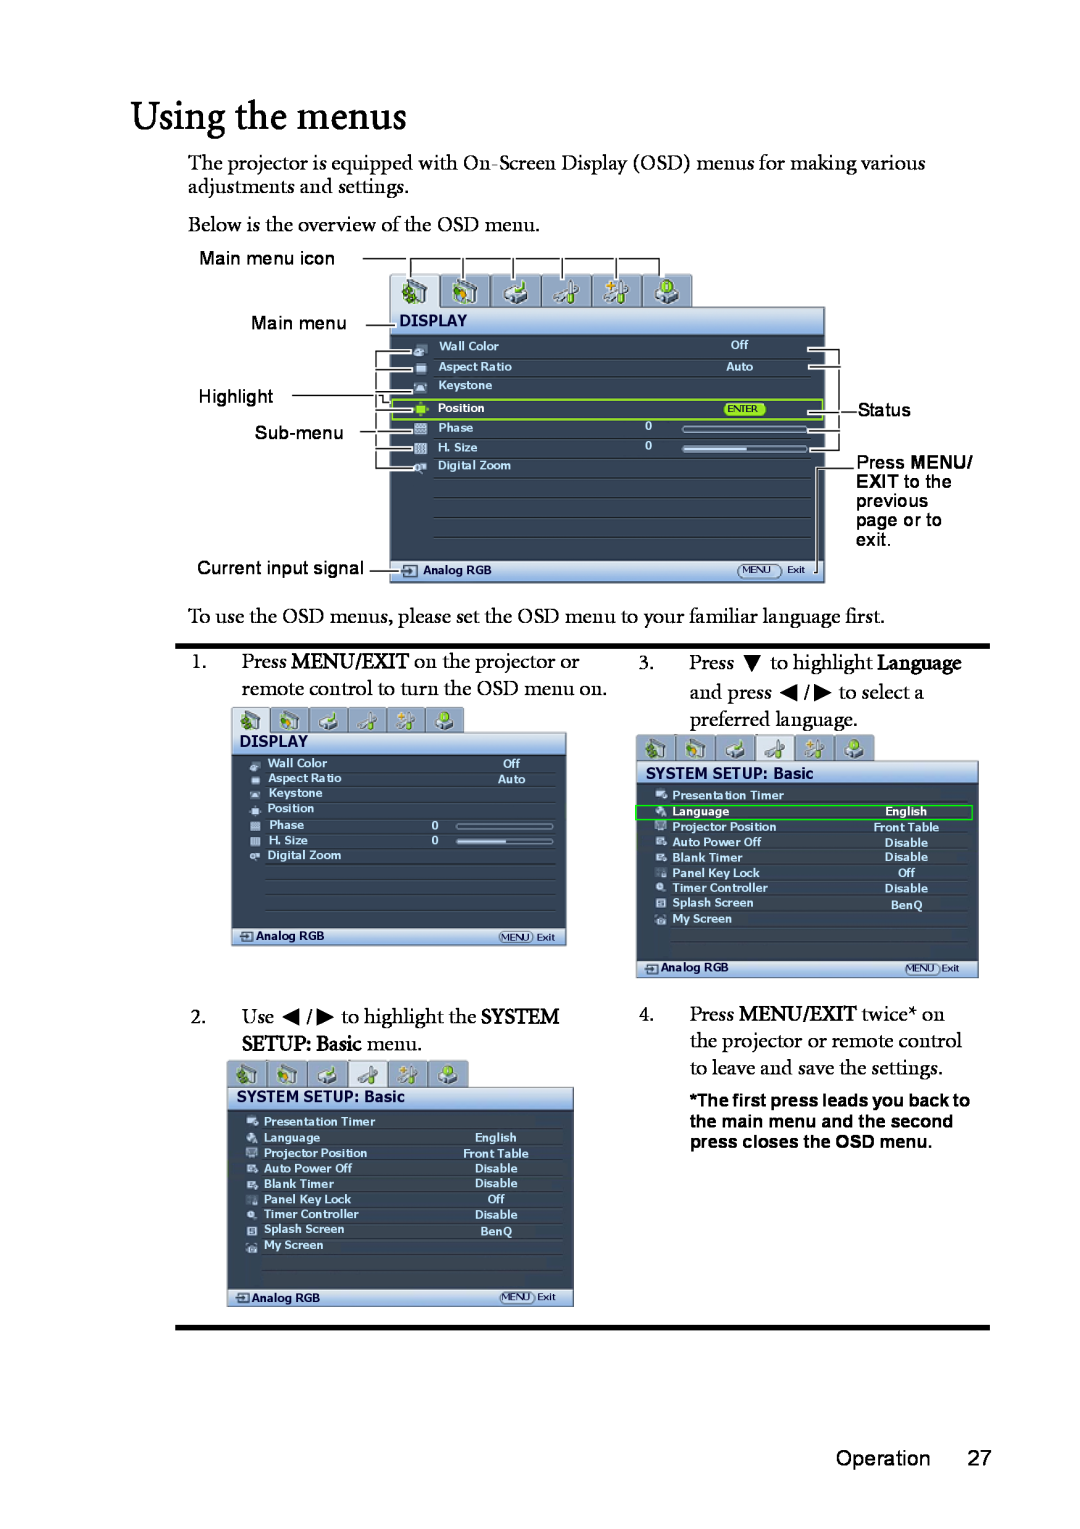 BenQ MP723 Using the menus, Below is the overview of the OSD menu, Use / to highlight the SYSTEM SETUP Basic menu 